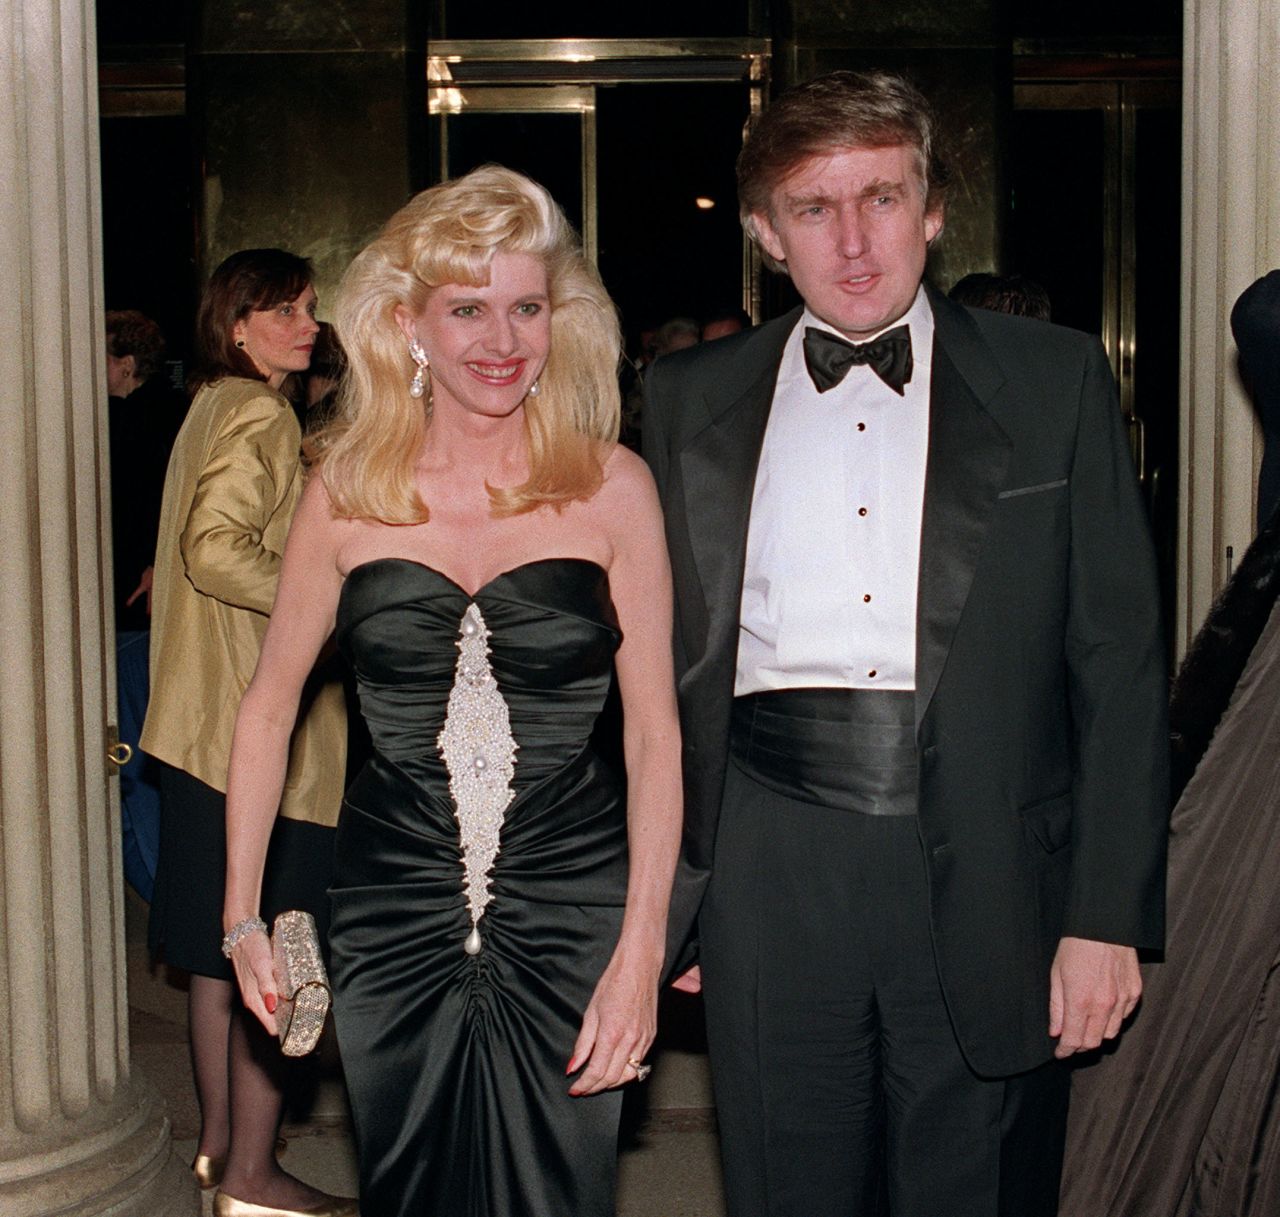 Trump was married to Ivana Zelnicek Trump from 1977 to 1990, when they divorced. They had three children together: Donald Jr., Ivanka and Eric.